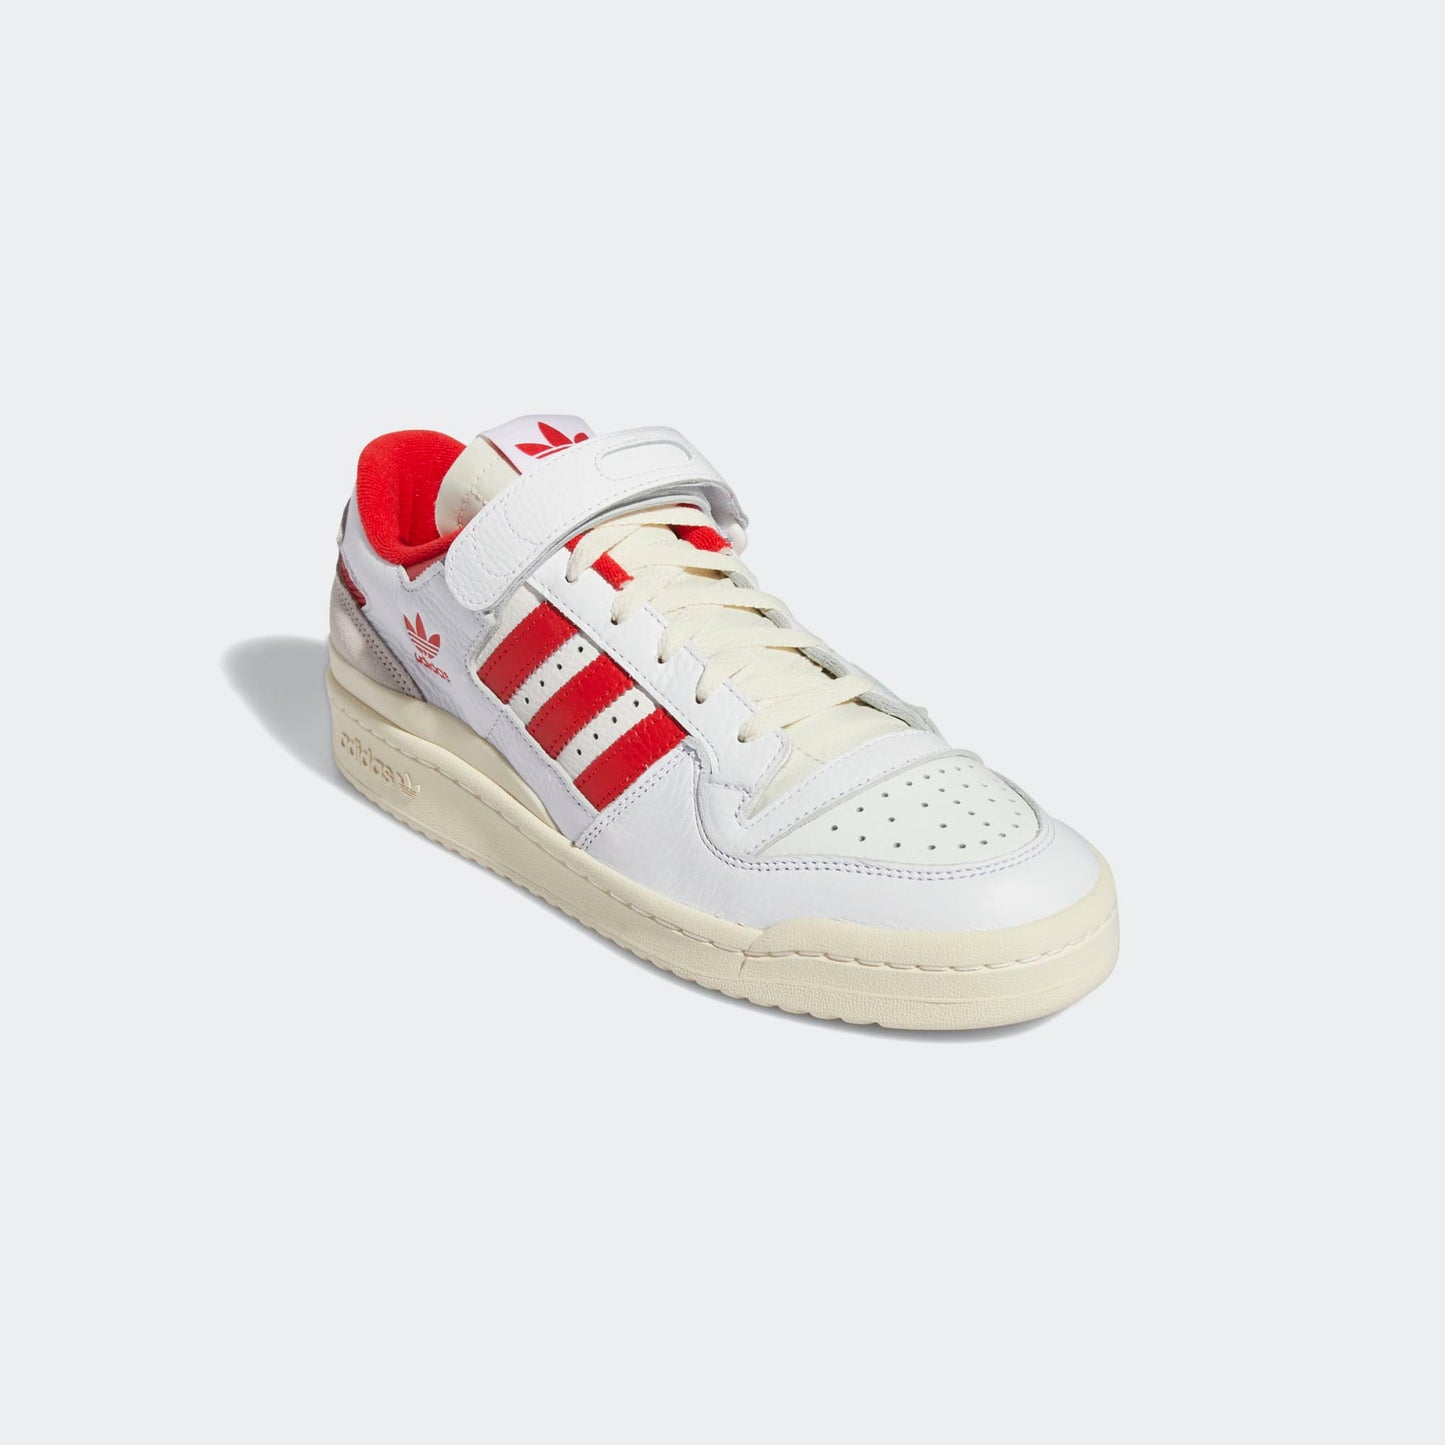 adidas Forum 84 Low GY5848